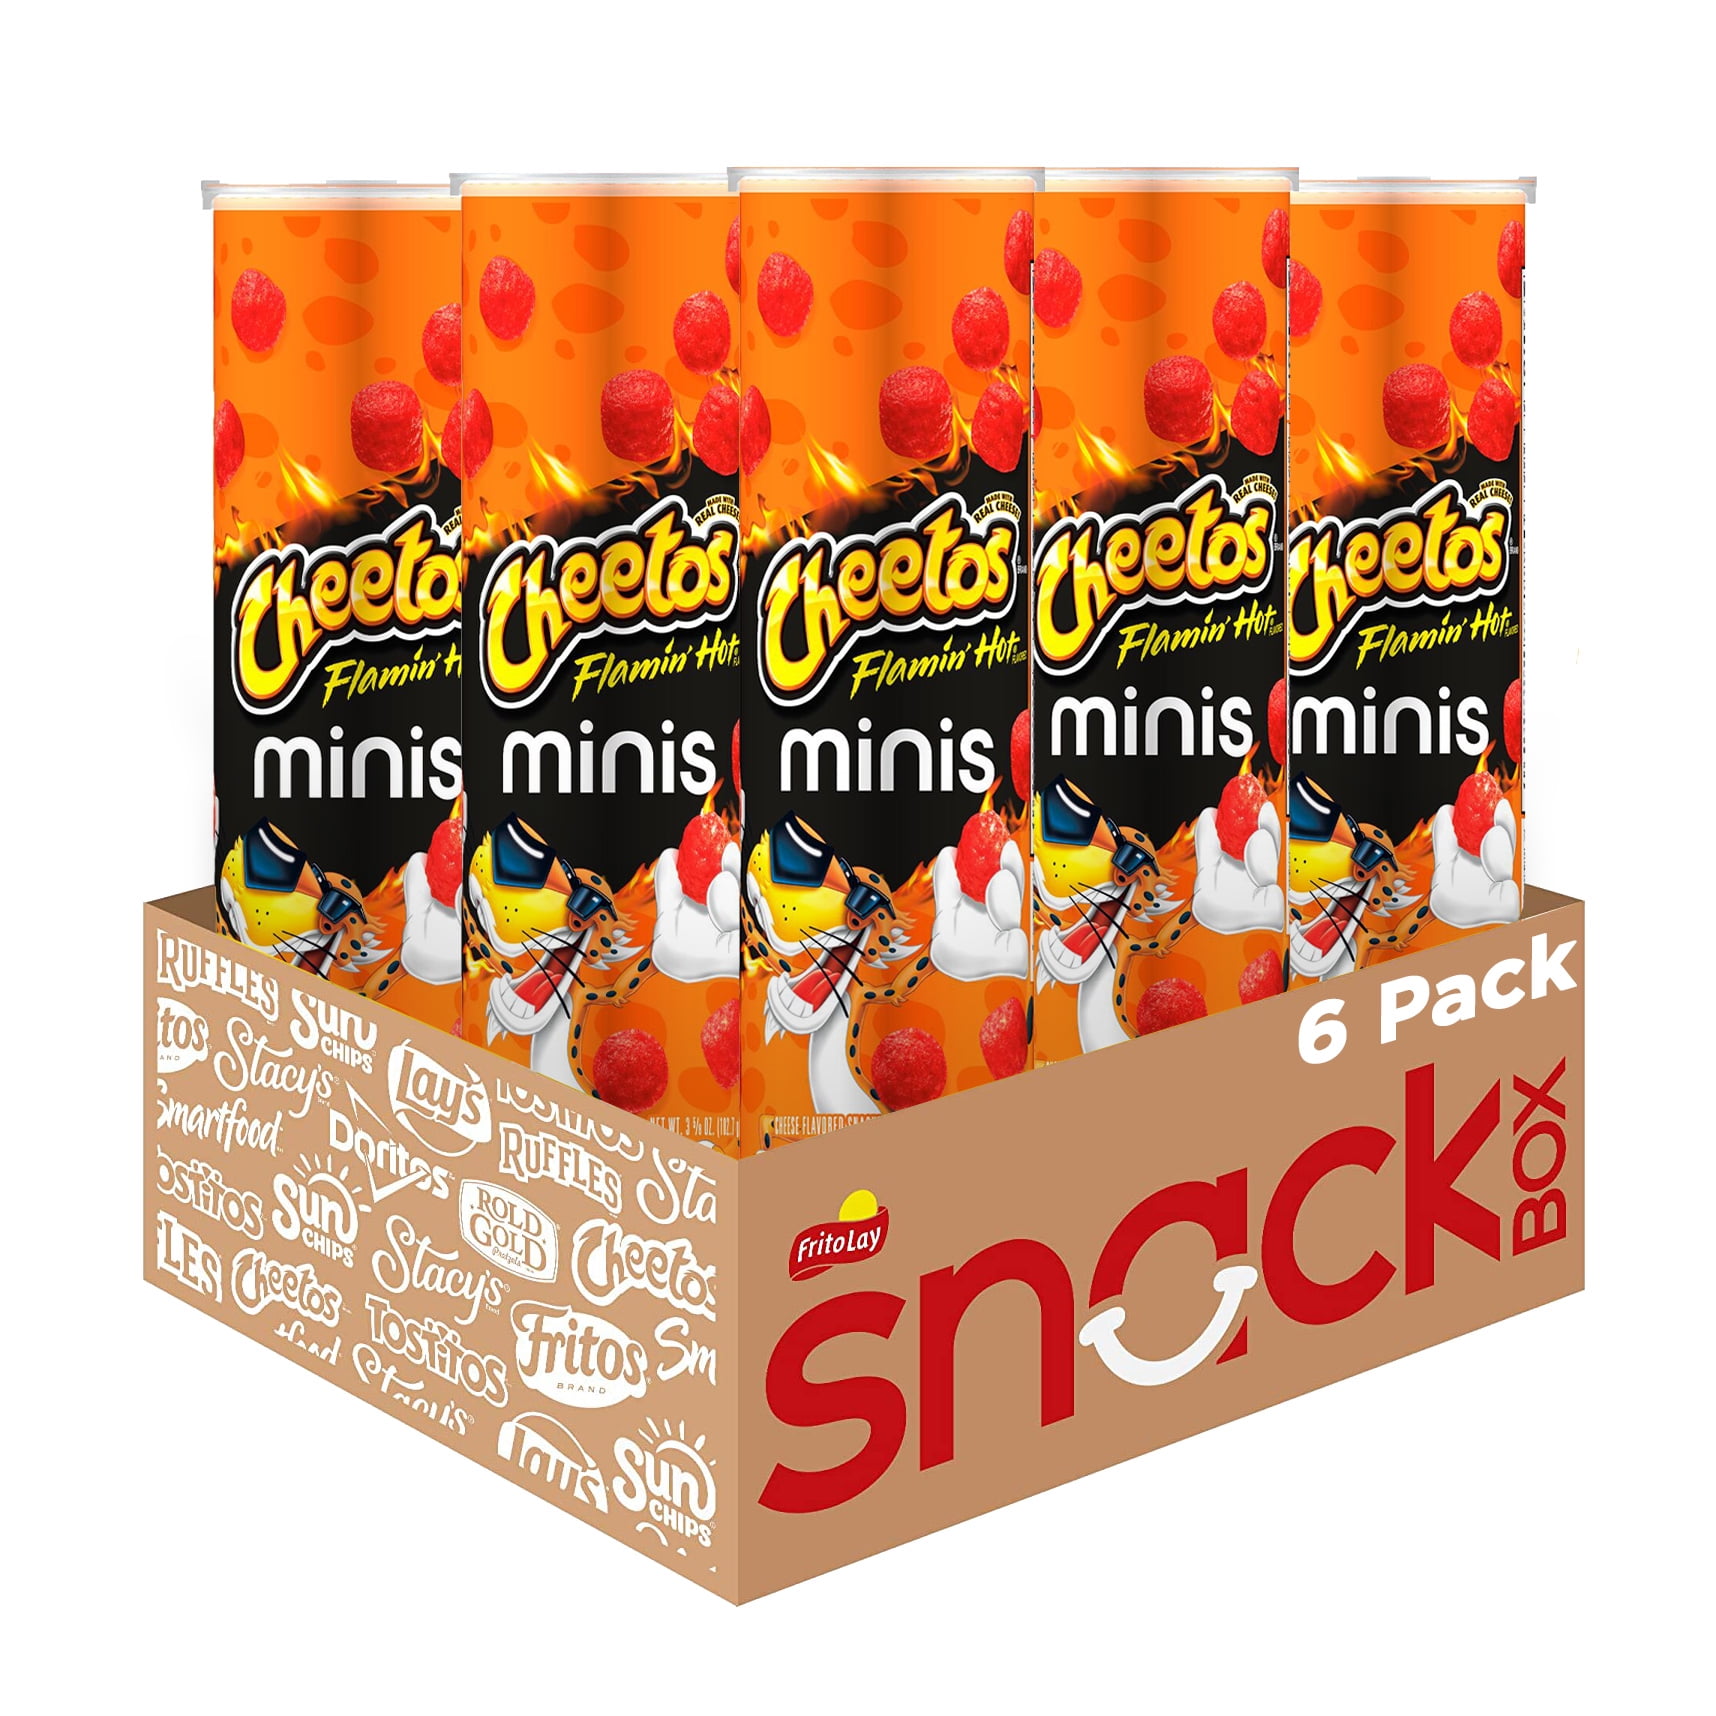 6 bags] CHEETOS Flamin' Hot Asteroids Flavor Shots Spicy Hot Savoury Snack